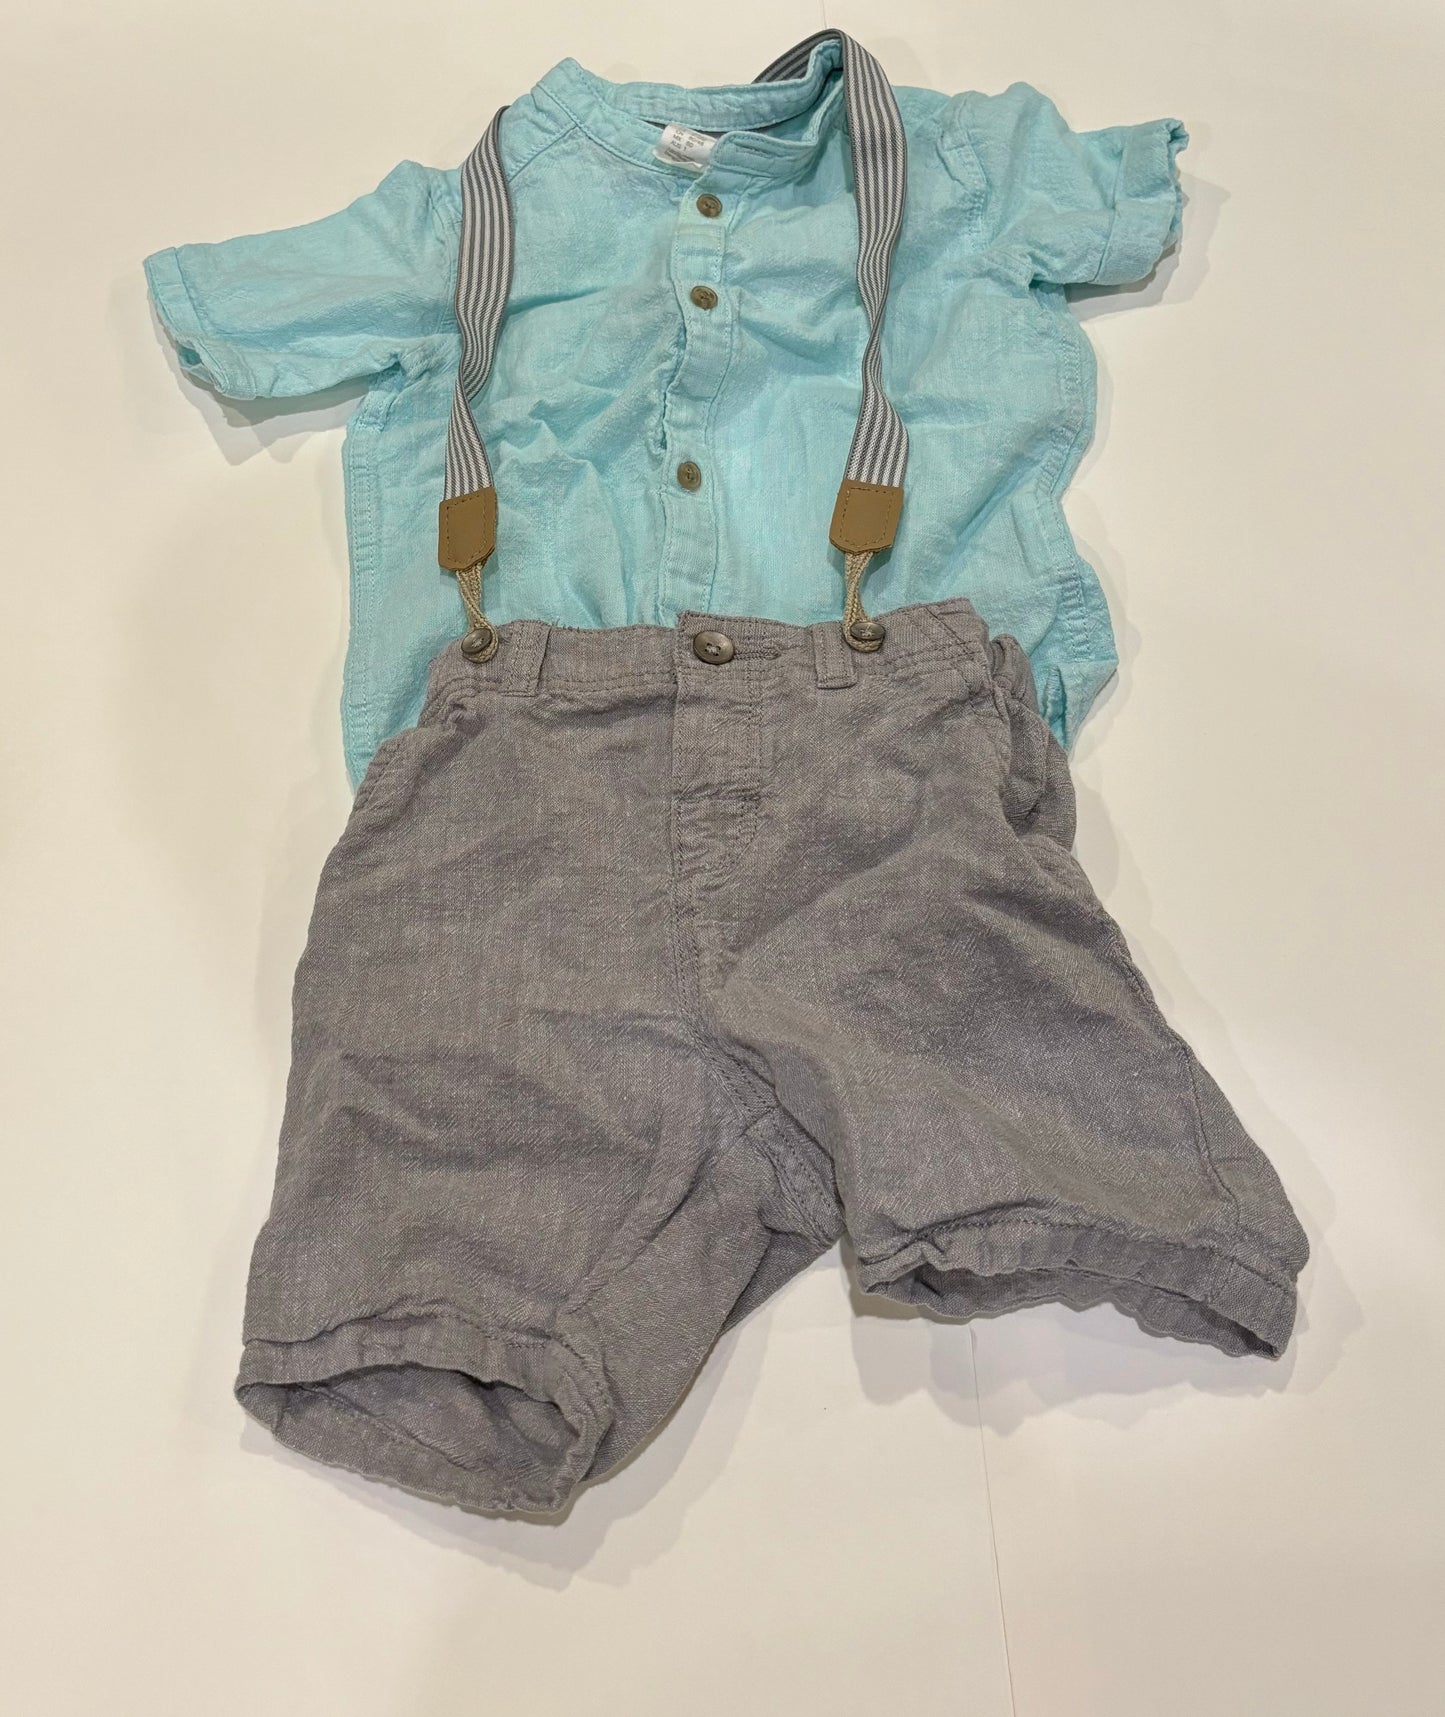 Boys 9 mo -12 mo H&M outfit, would be perfect for Easter